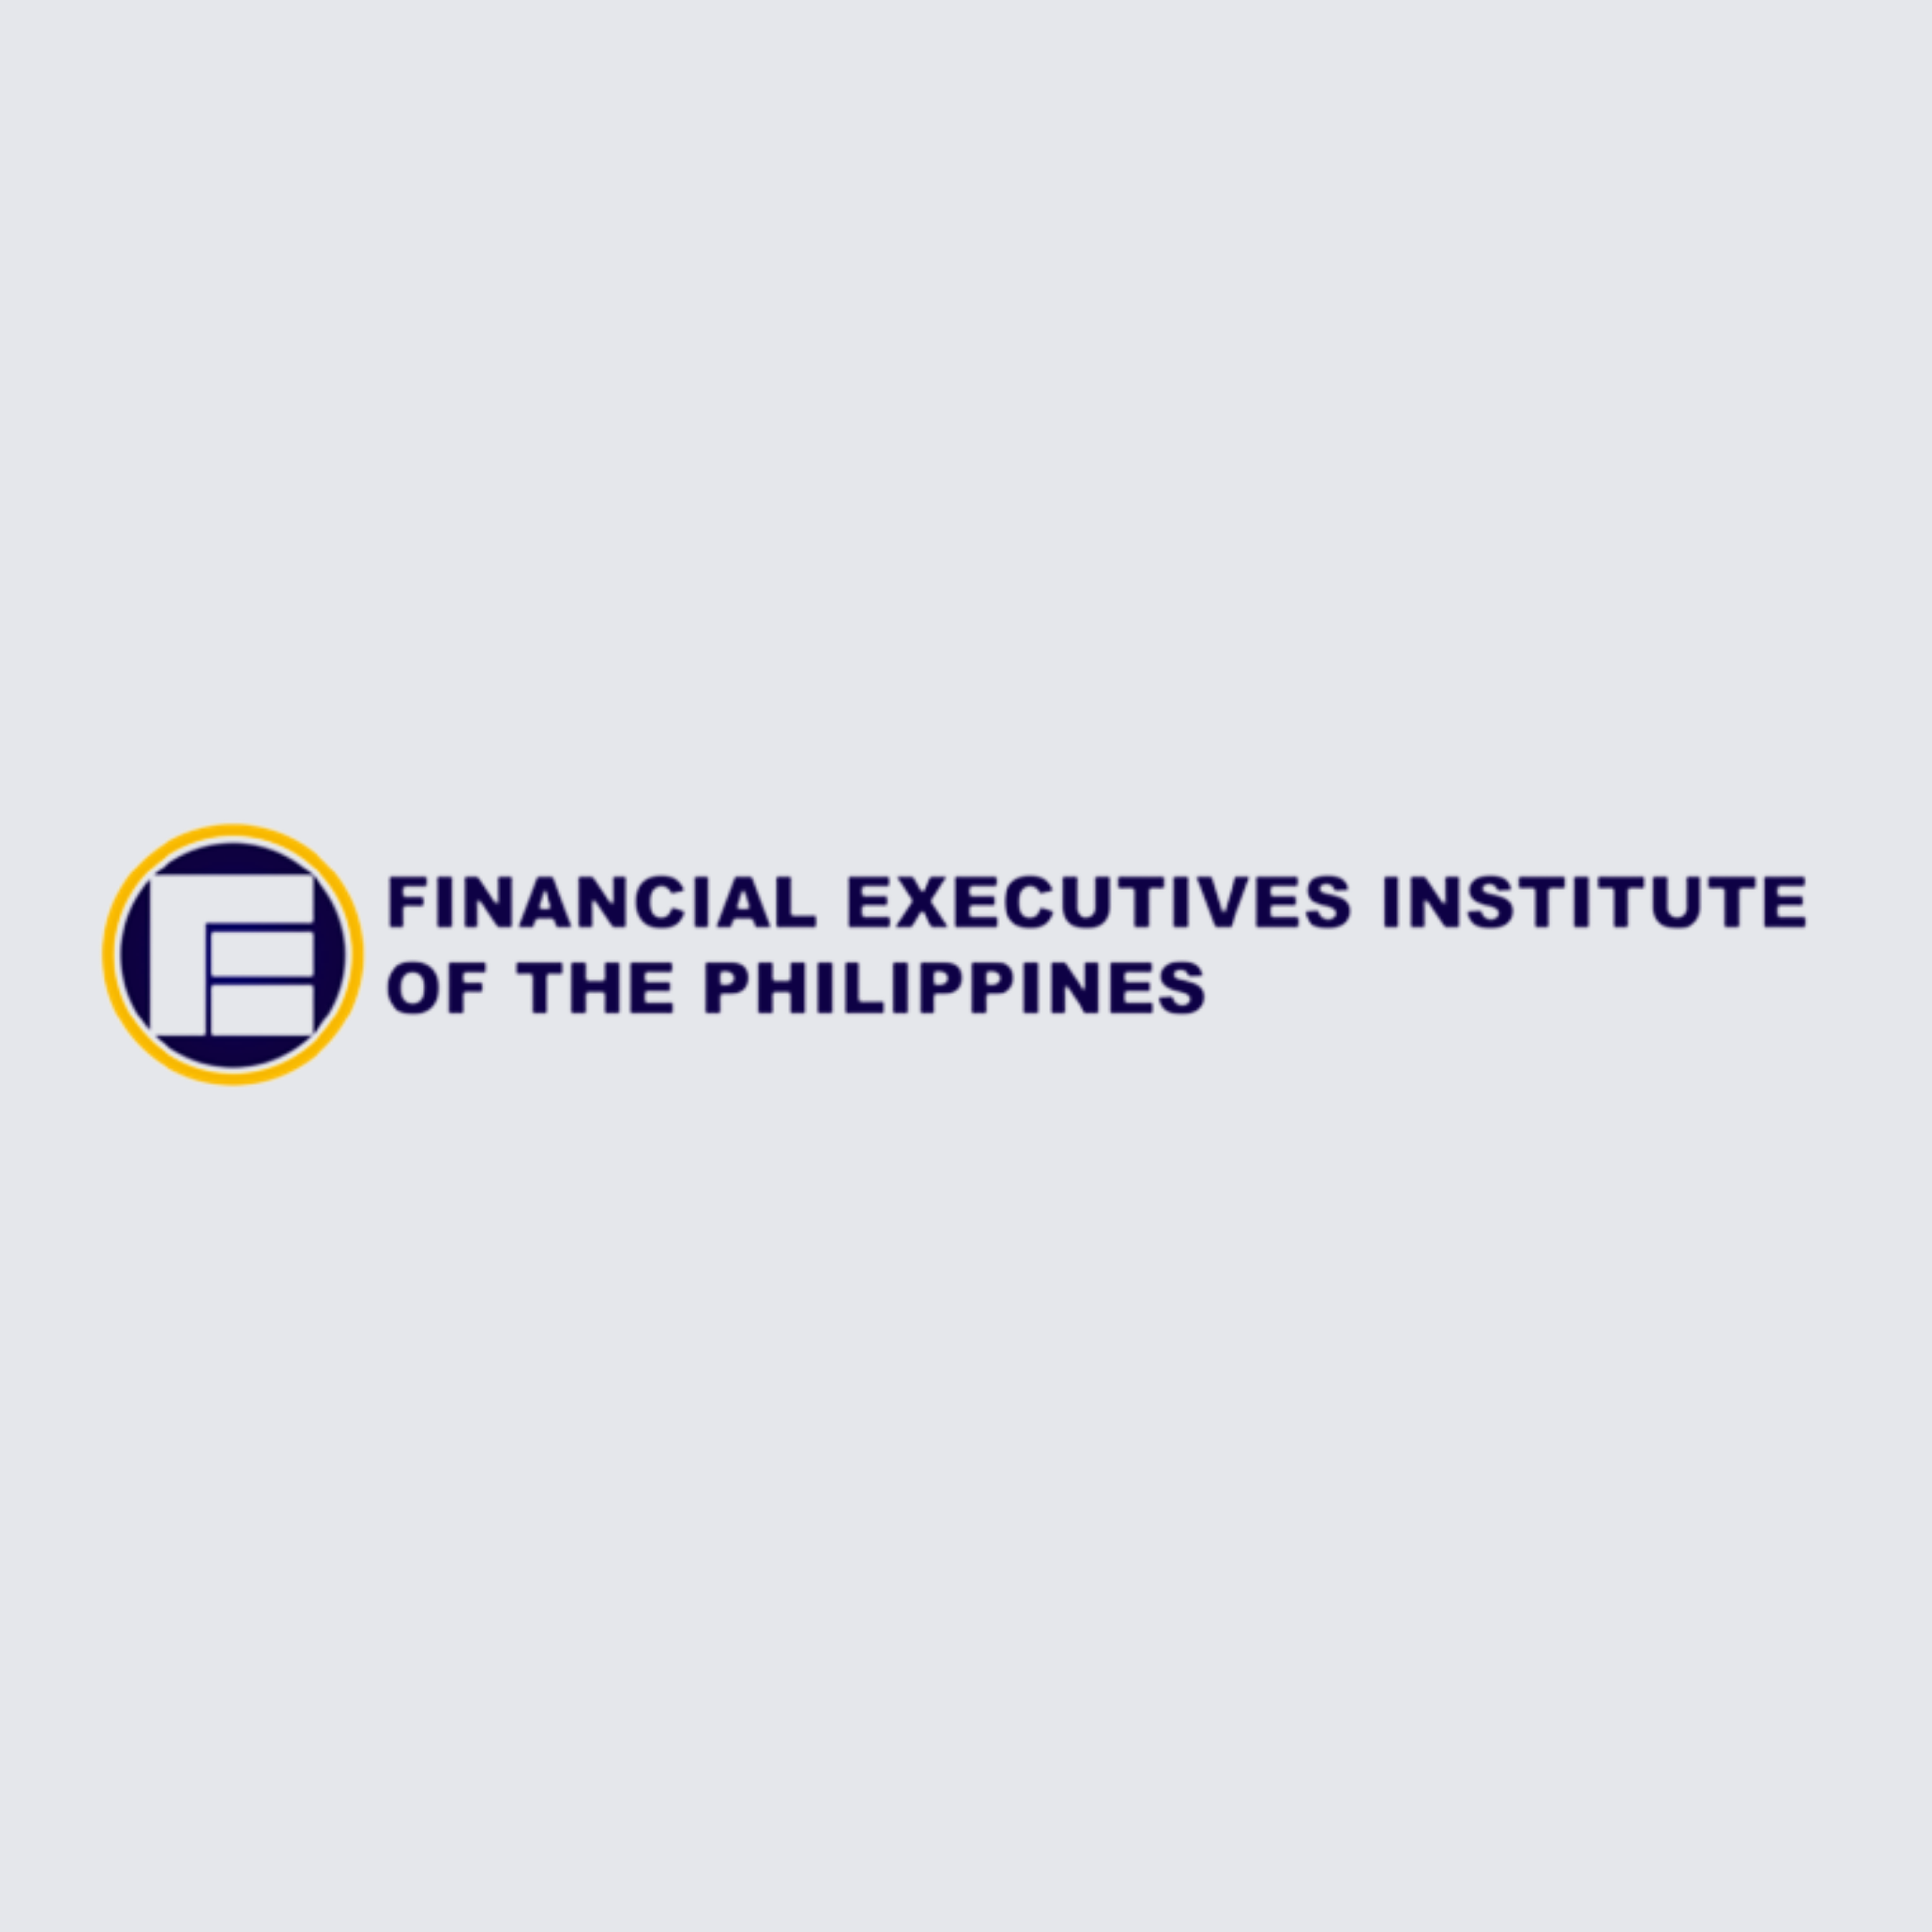 Financial Executives Institute of the Philippines